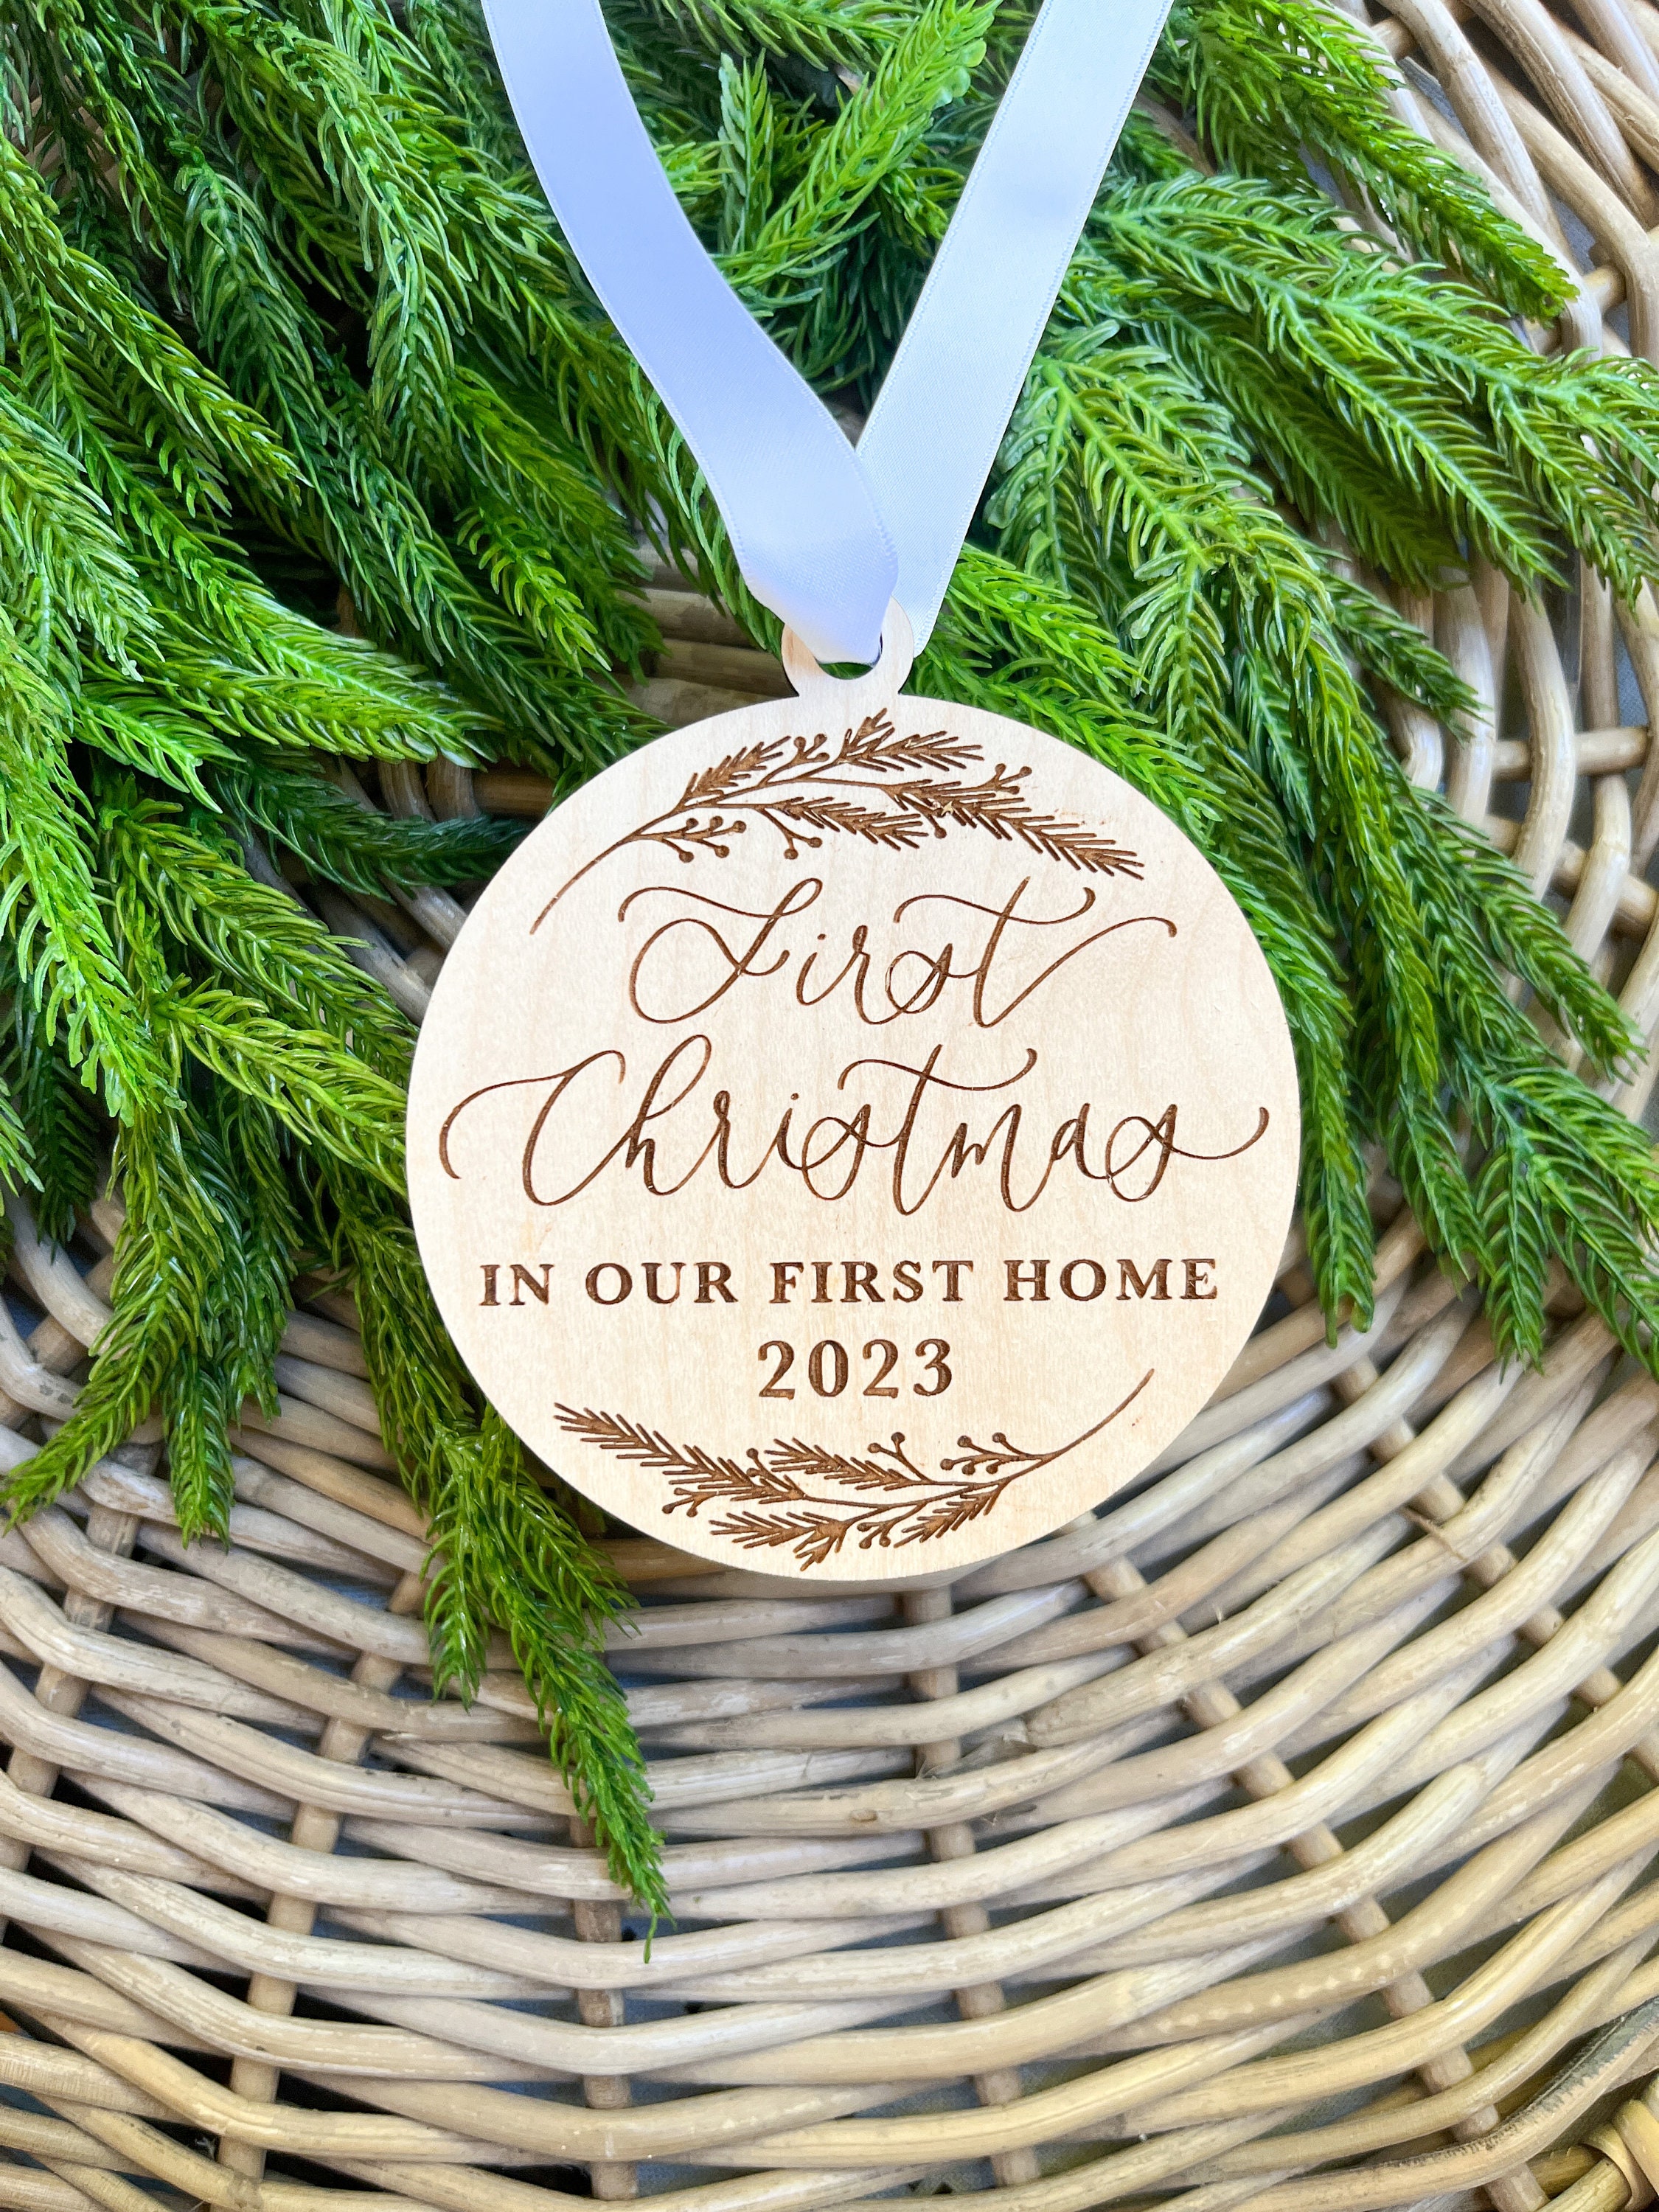 DIY Newlyweds: DIY Home Decorating Ideas & Projects: I'm Dreaming of White  Christmas Decorations